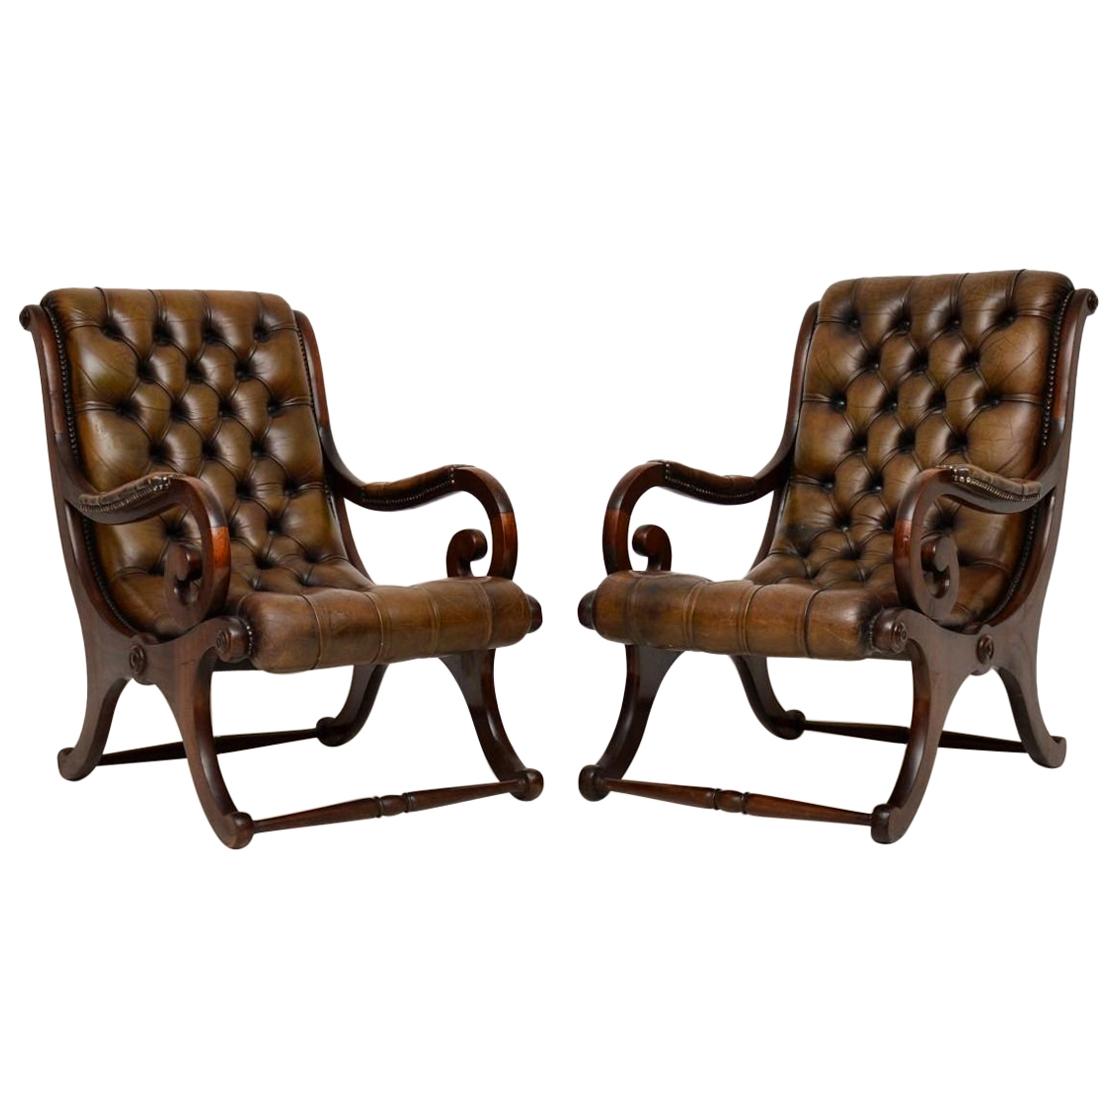 Pair of Antique Mahogany and Leather Armchairs